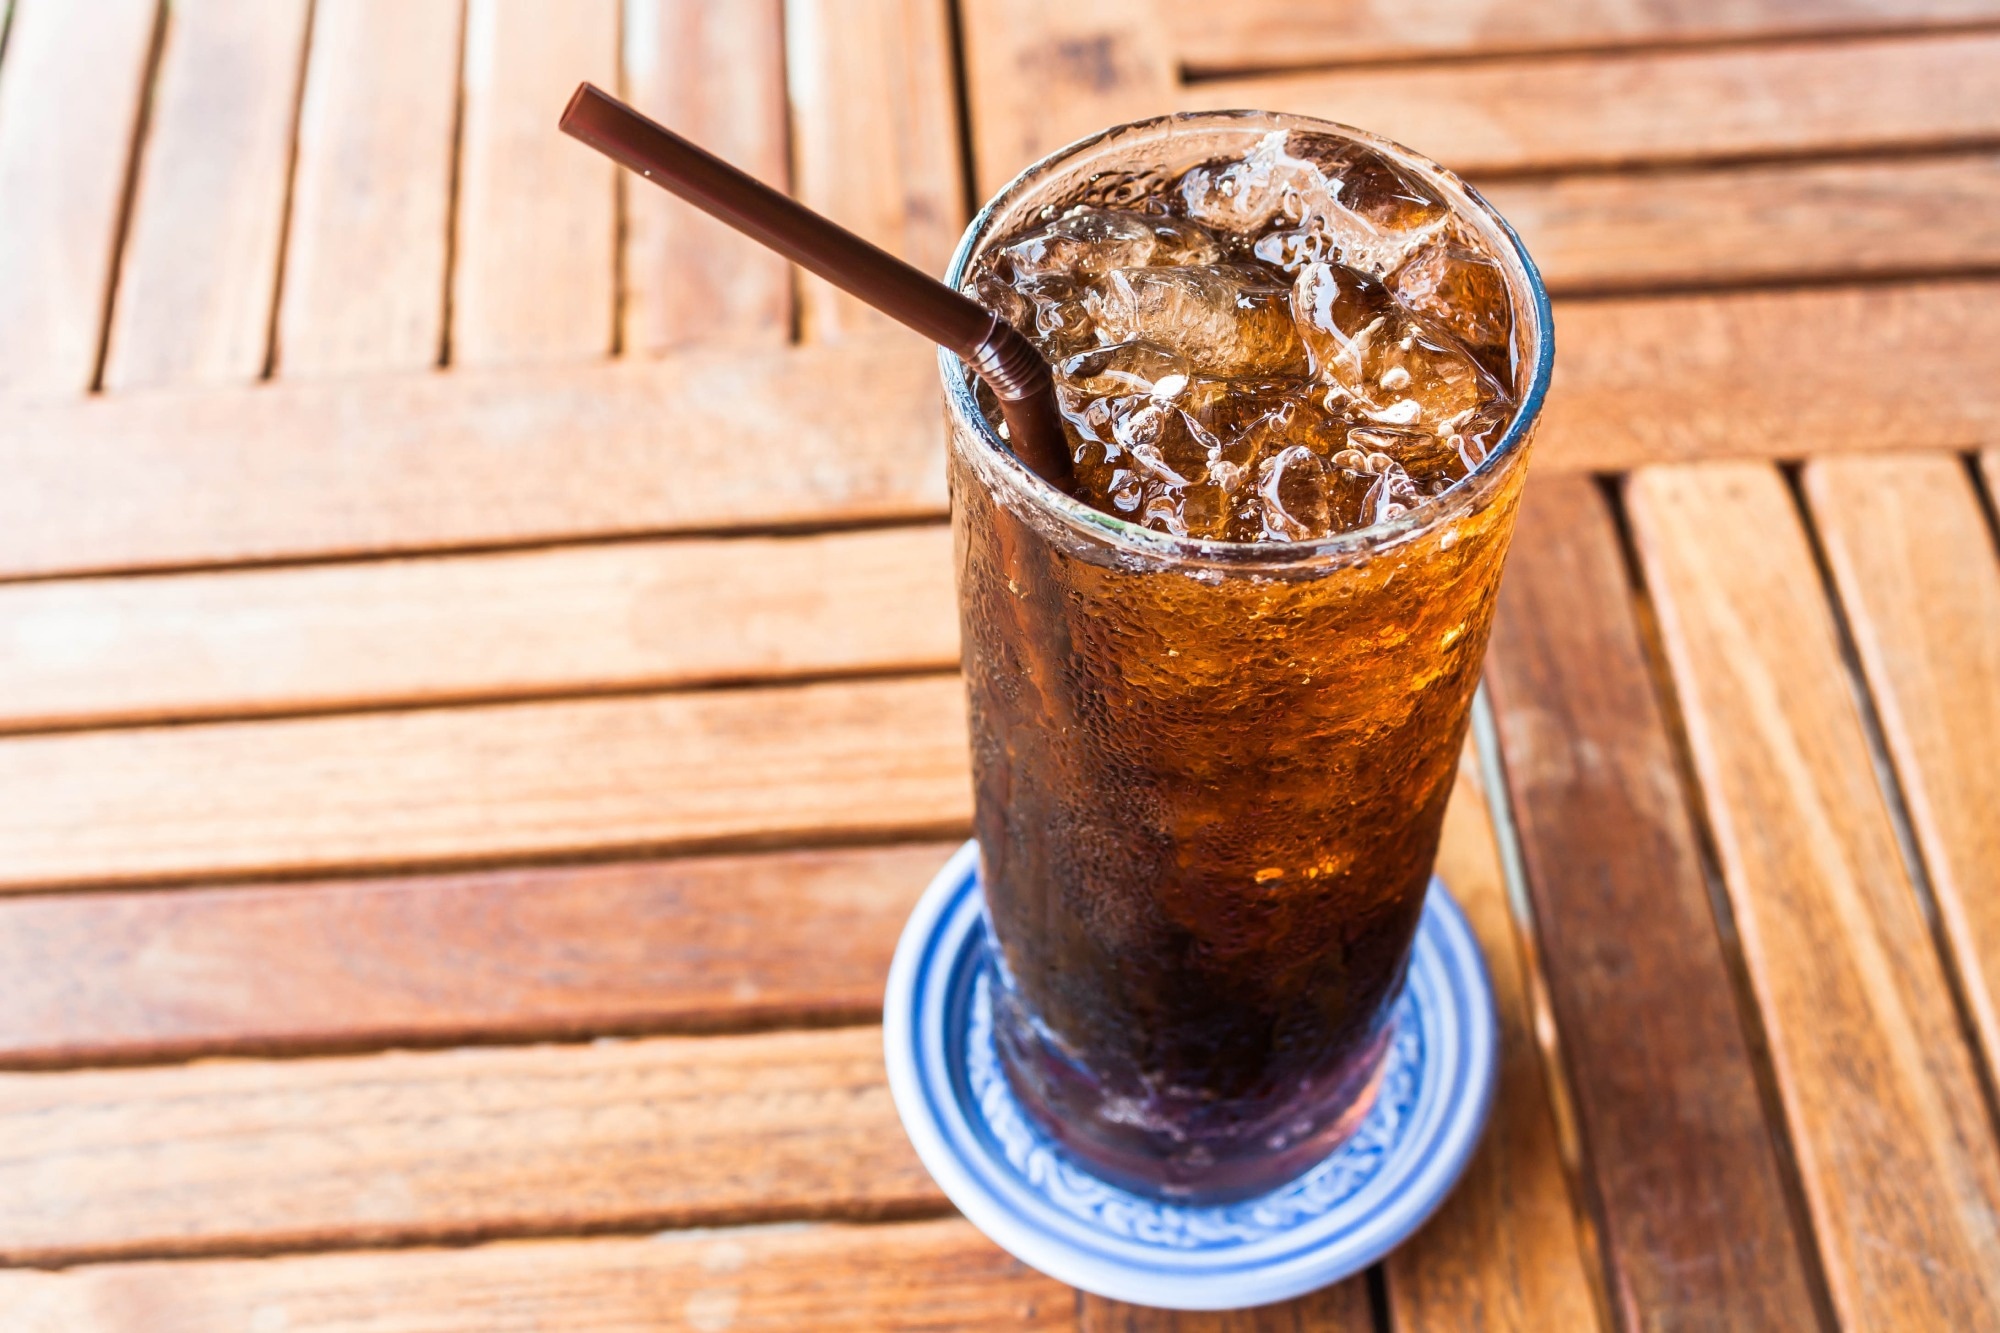 Study: Association between diet soft drink consumption and metabolic dysfunction-associated steatotic liver disease: findings from the NHANES. Image Credit: punsayaporn/Shutterstock.com